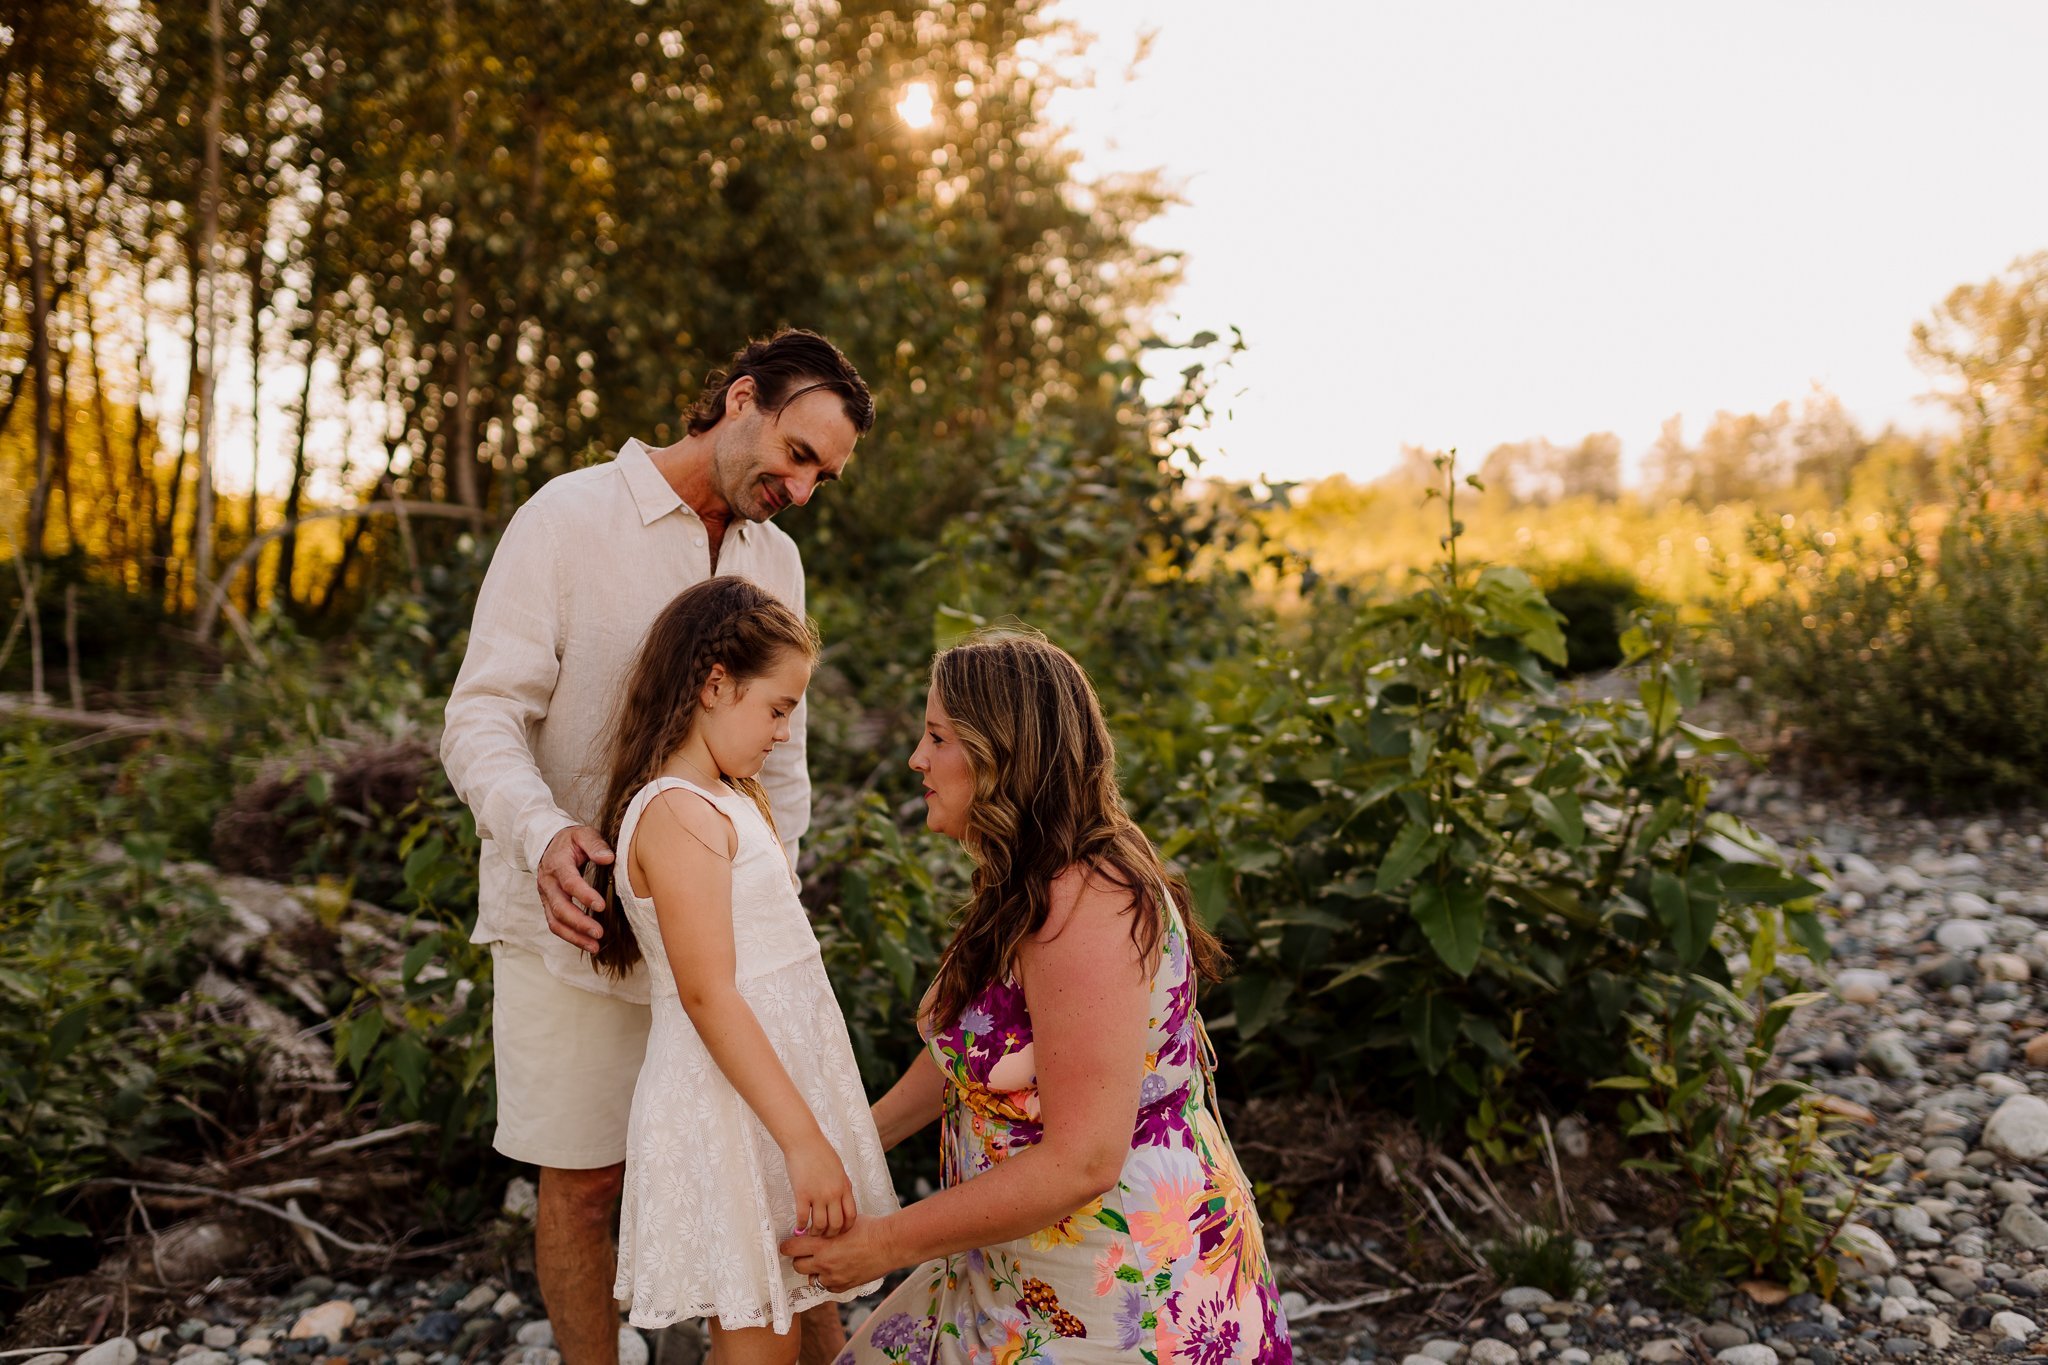 Vedder+River+Family+Session+-+Anna+Hurley+Photography++(3).jpg